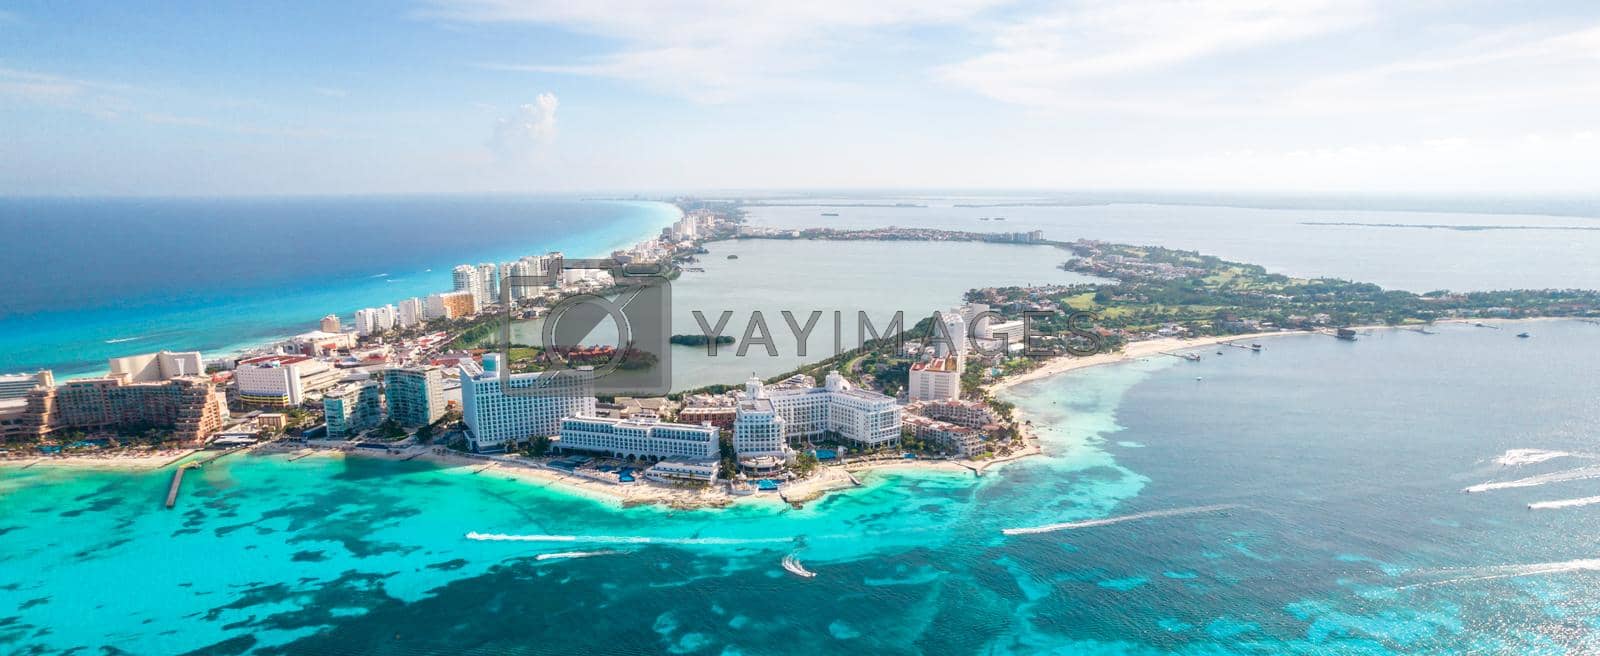 Royalty free image of Aerial panoramic view of Cancun beach and city hotel zone in Mexico. Caribbean coast landscape of Mexican resort with beach Playa Caracol and Kukulcan road. Riviera Maya in Quintana roo region on Yucatan Peninsula by Mariakray